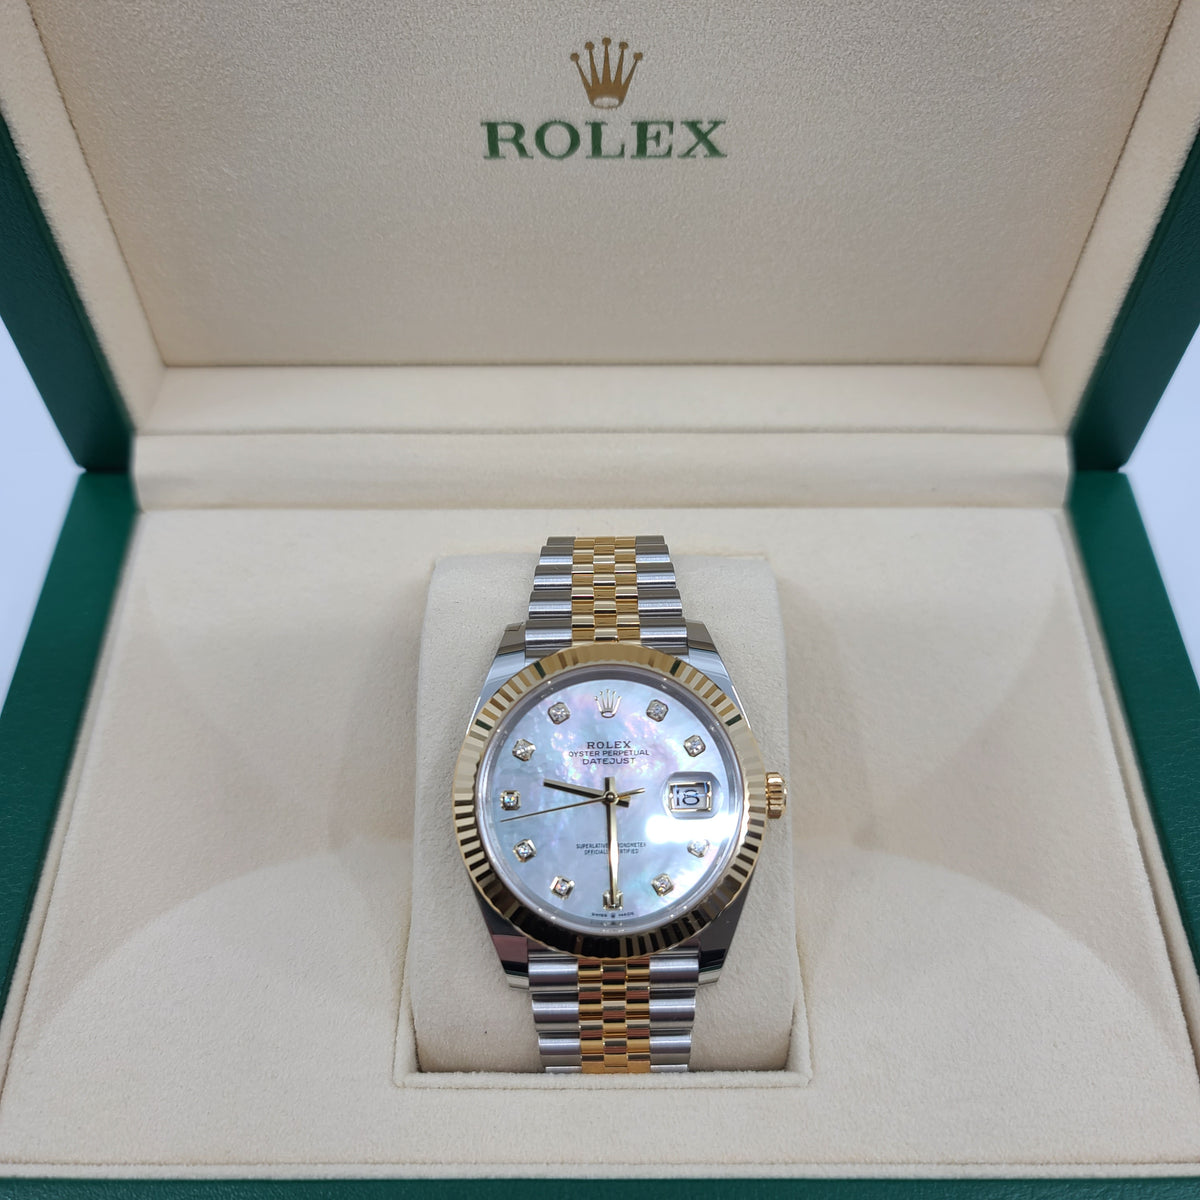 04/17/2022 DATE OF PURCHASERolex Oyster Perpetual Datejust 41 Watch, Two-tone Jubilee bracelet, Pearl dial set with diamonds, Fluted bezel 126333-0018